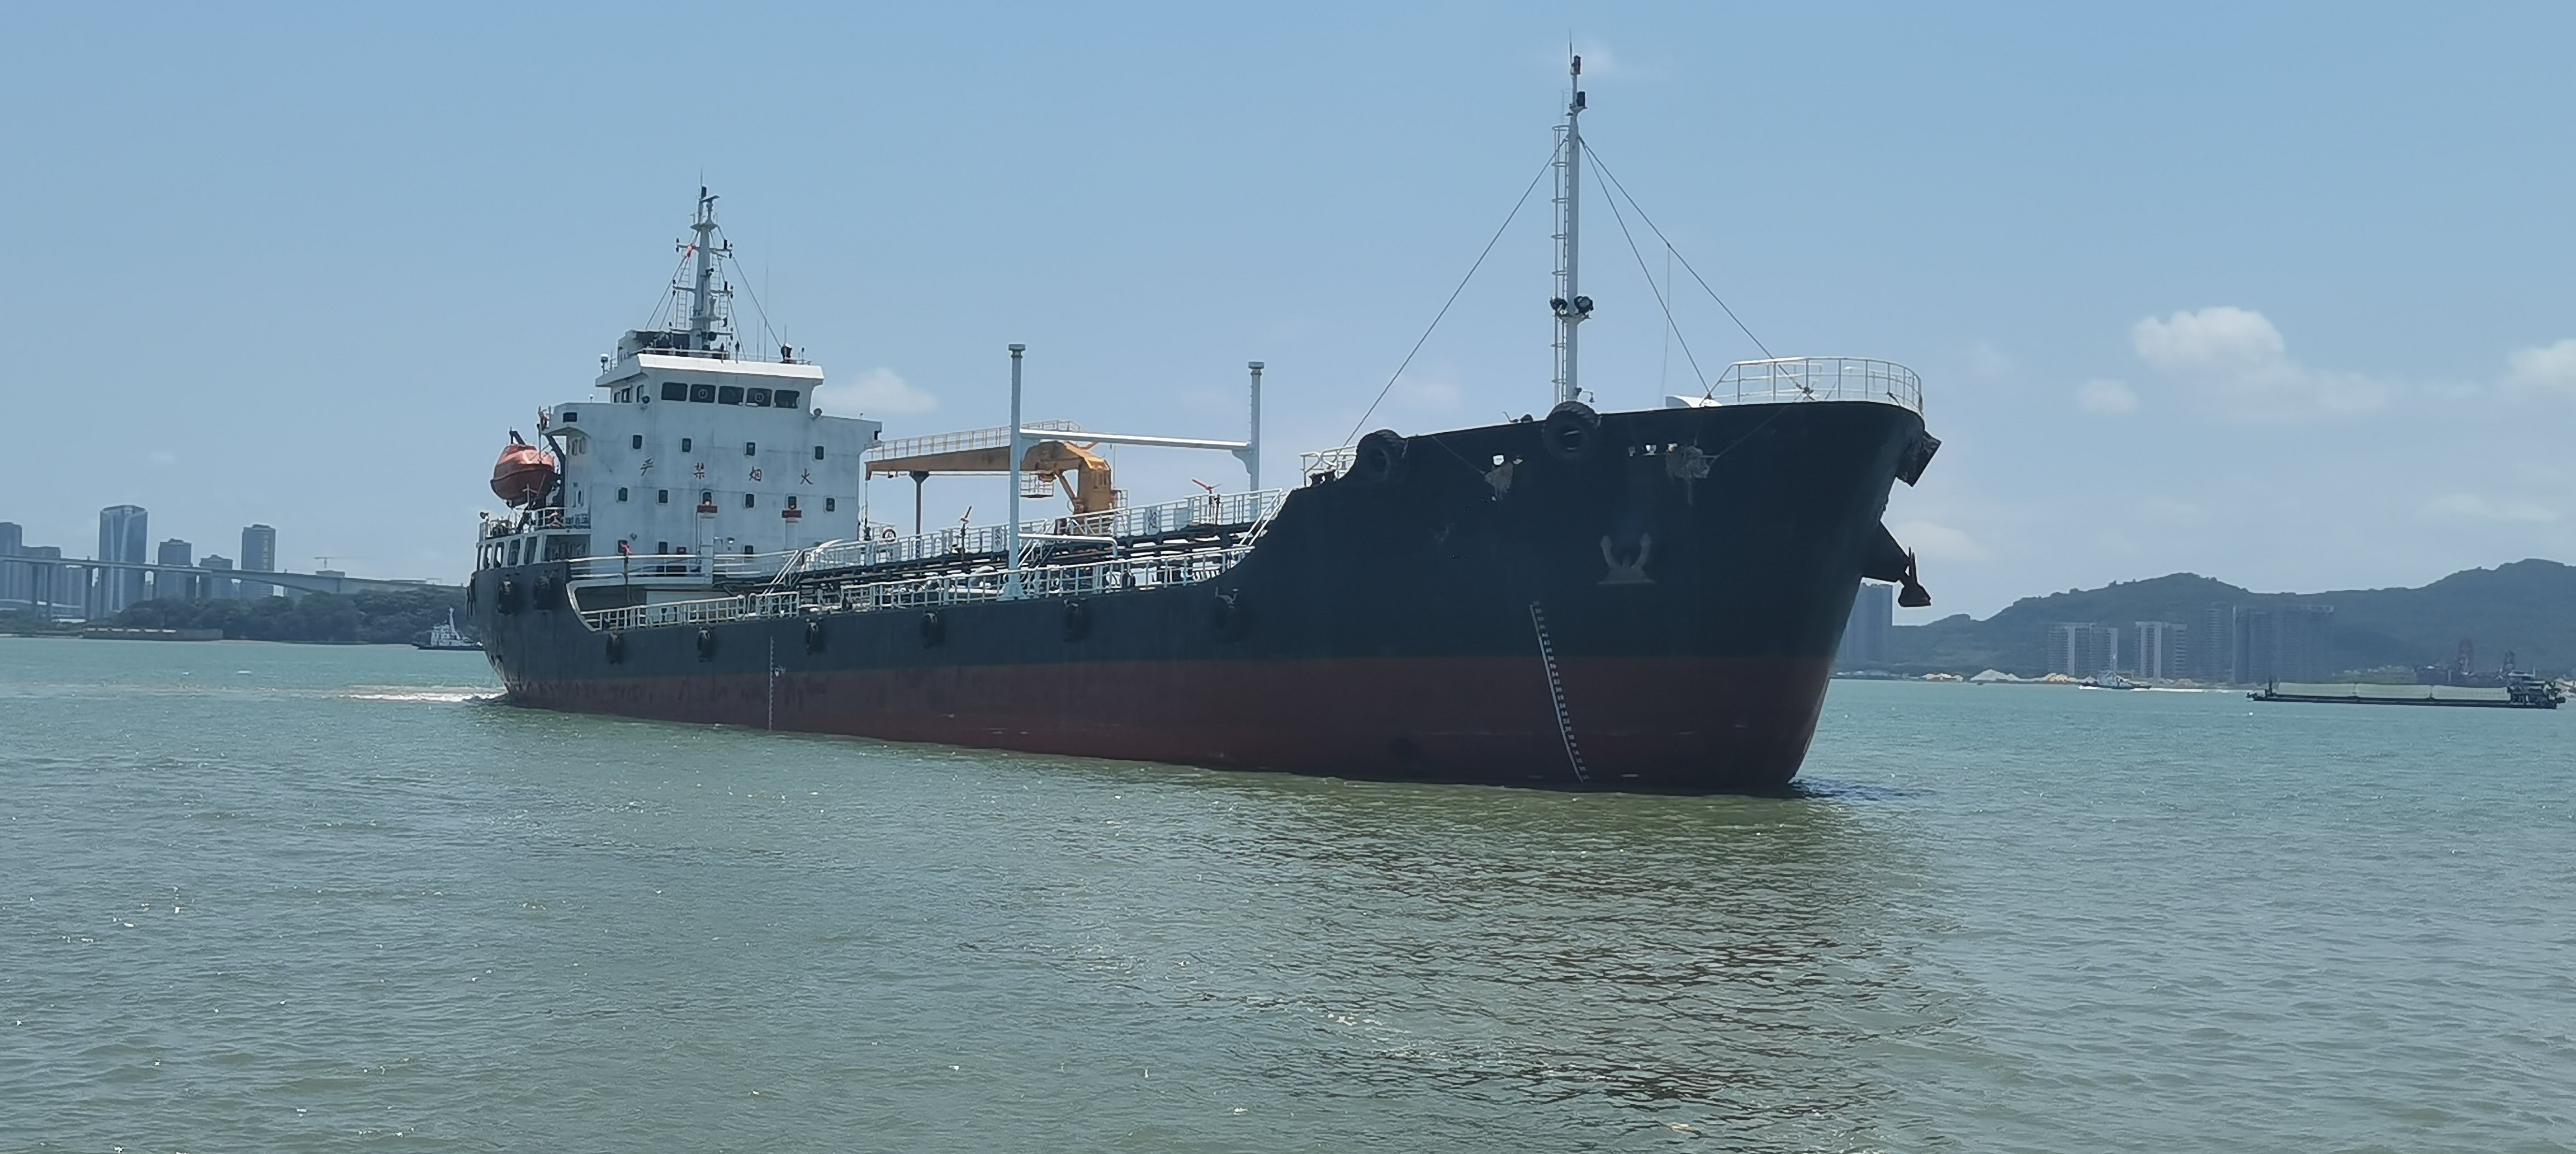 3800 T Product Oil Tanker For Sale